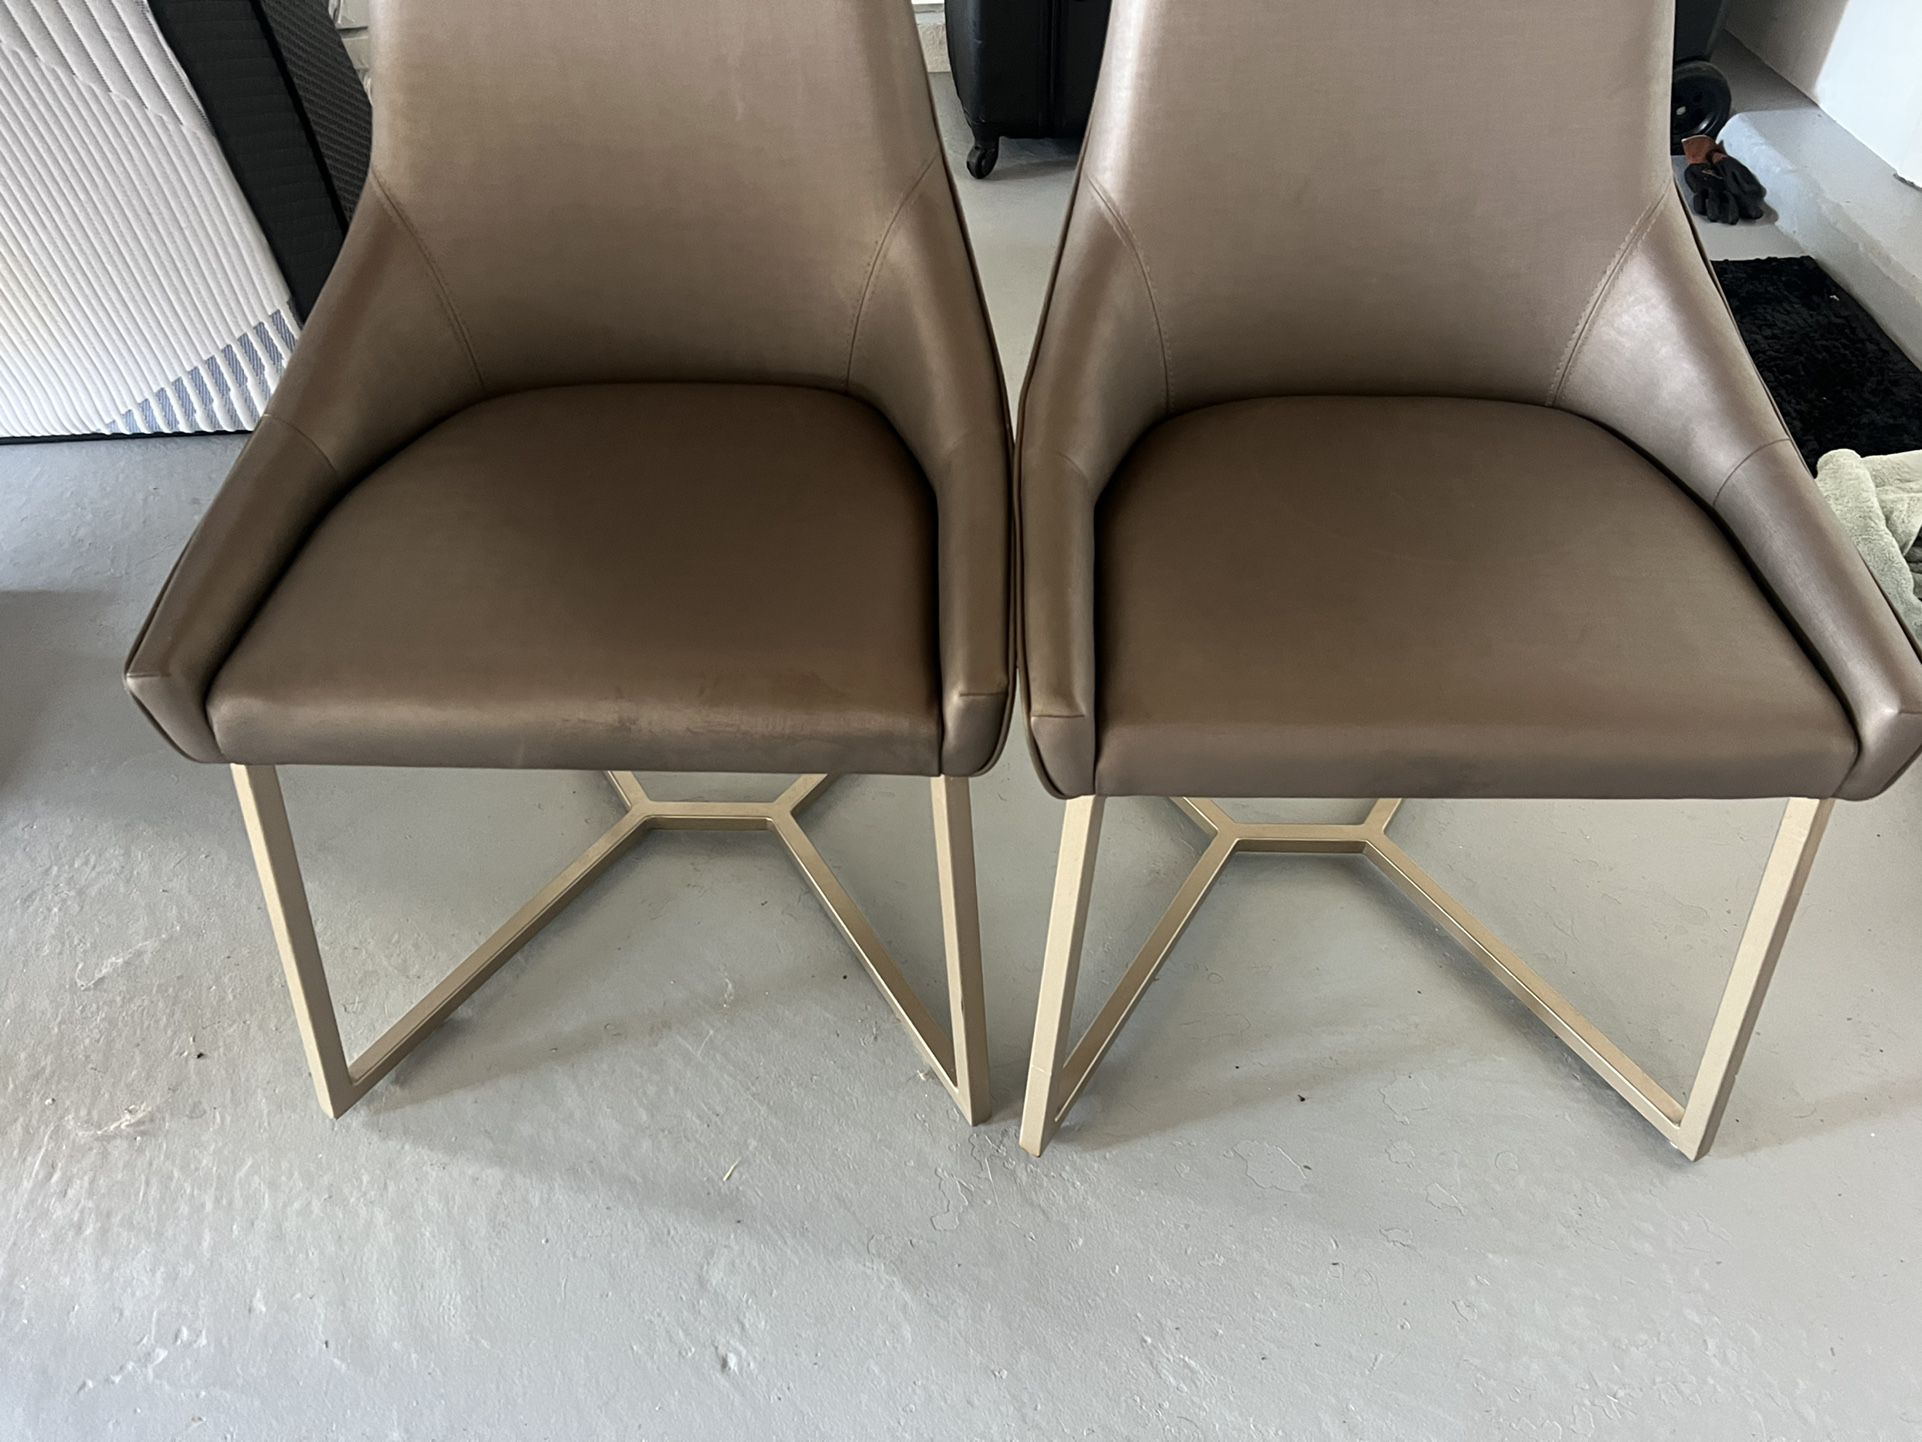 Hip Chair Luminex for Sale in Jersey City, NJ - OfferUp